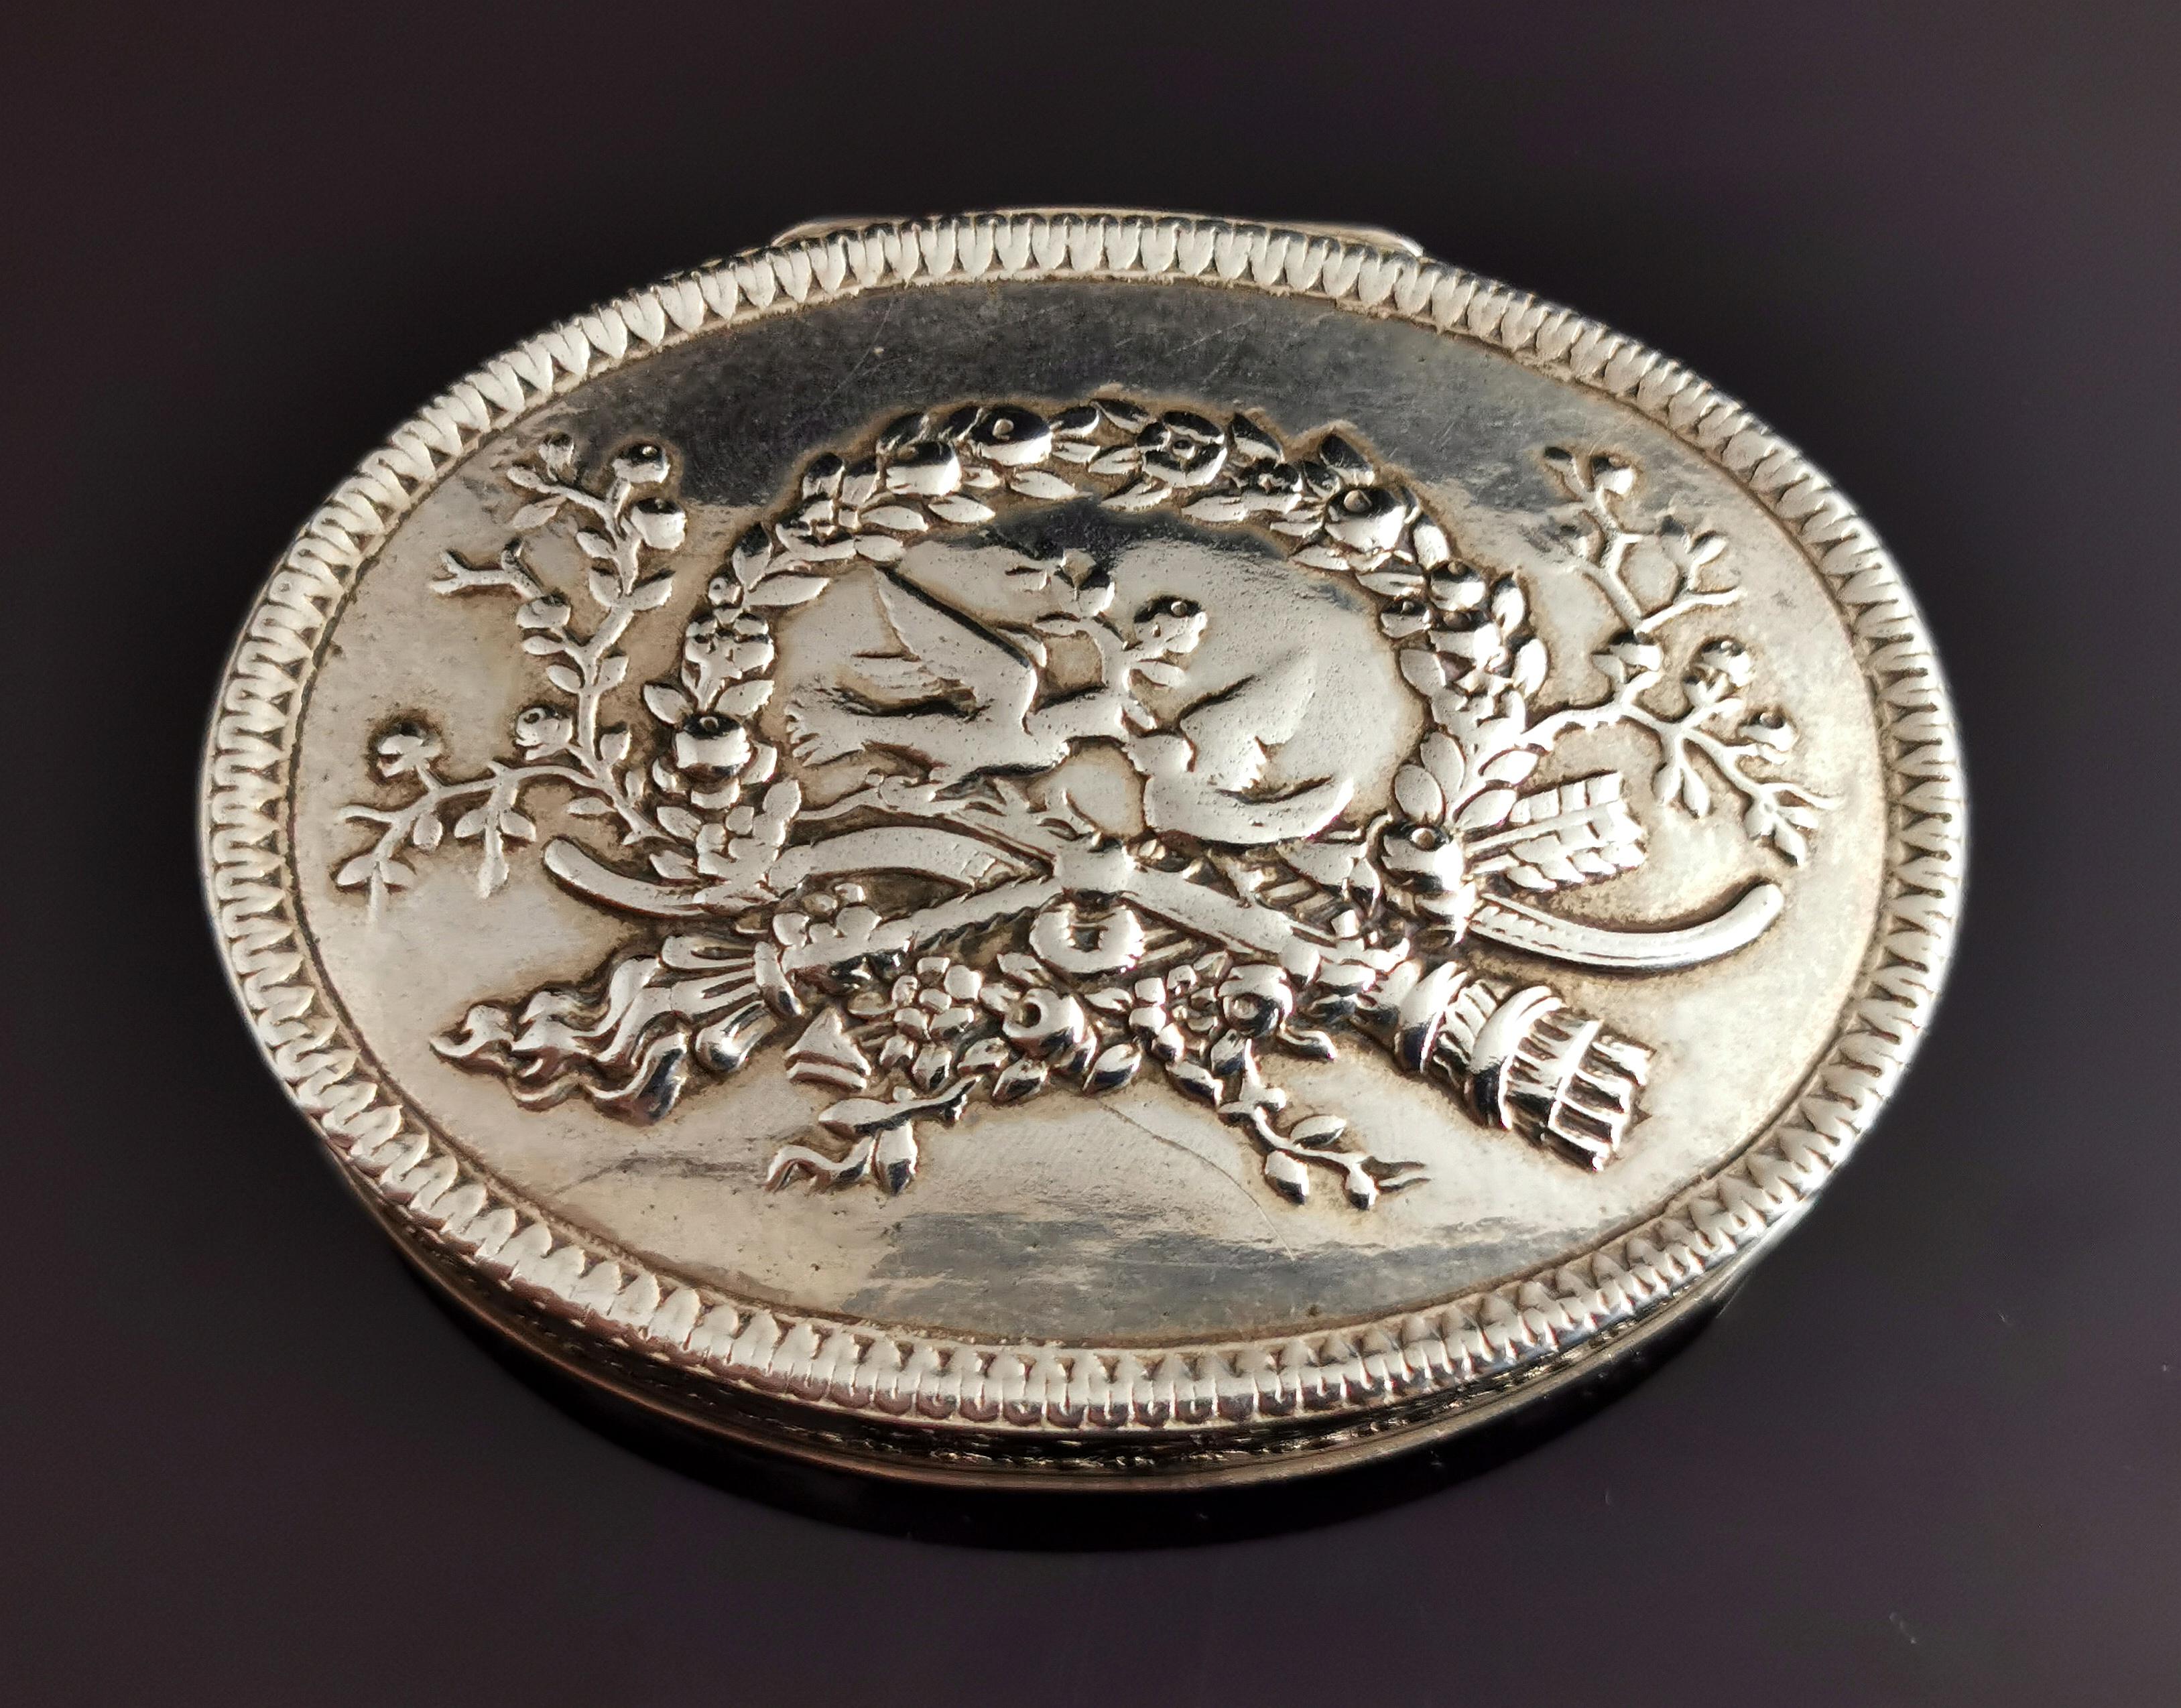 A fine antique French silver snuff box.

A table snuff box this is heavily and expertly decorated with bows, swags and flowers around the sides, a light pie crust rim and the image on the lid of two peace doves with an olive branch.

A lovely